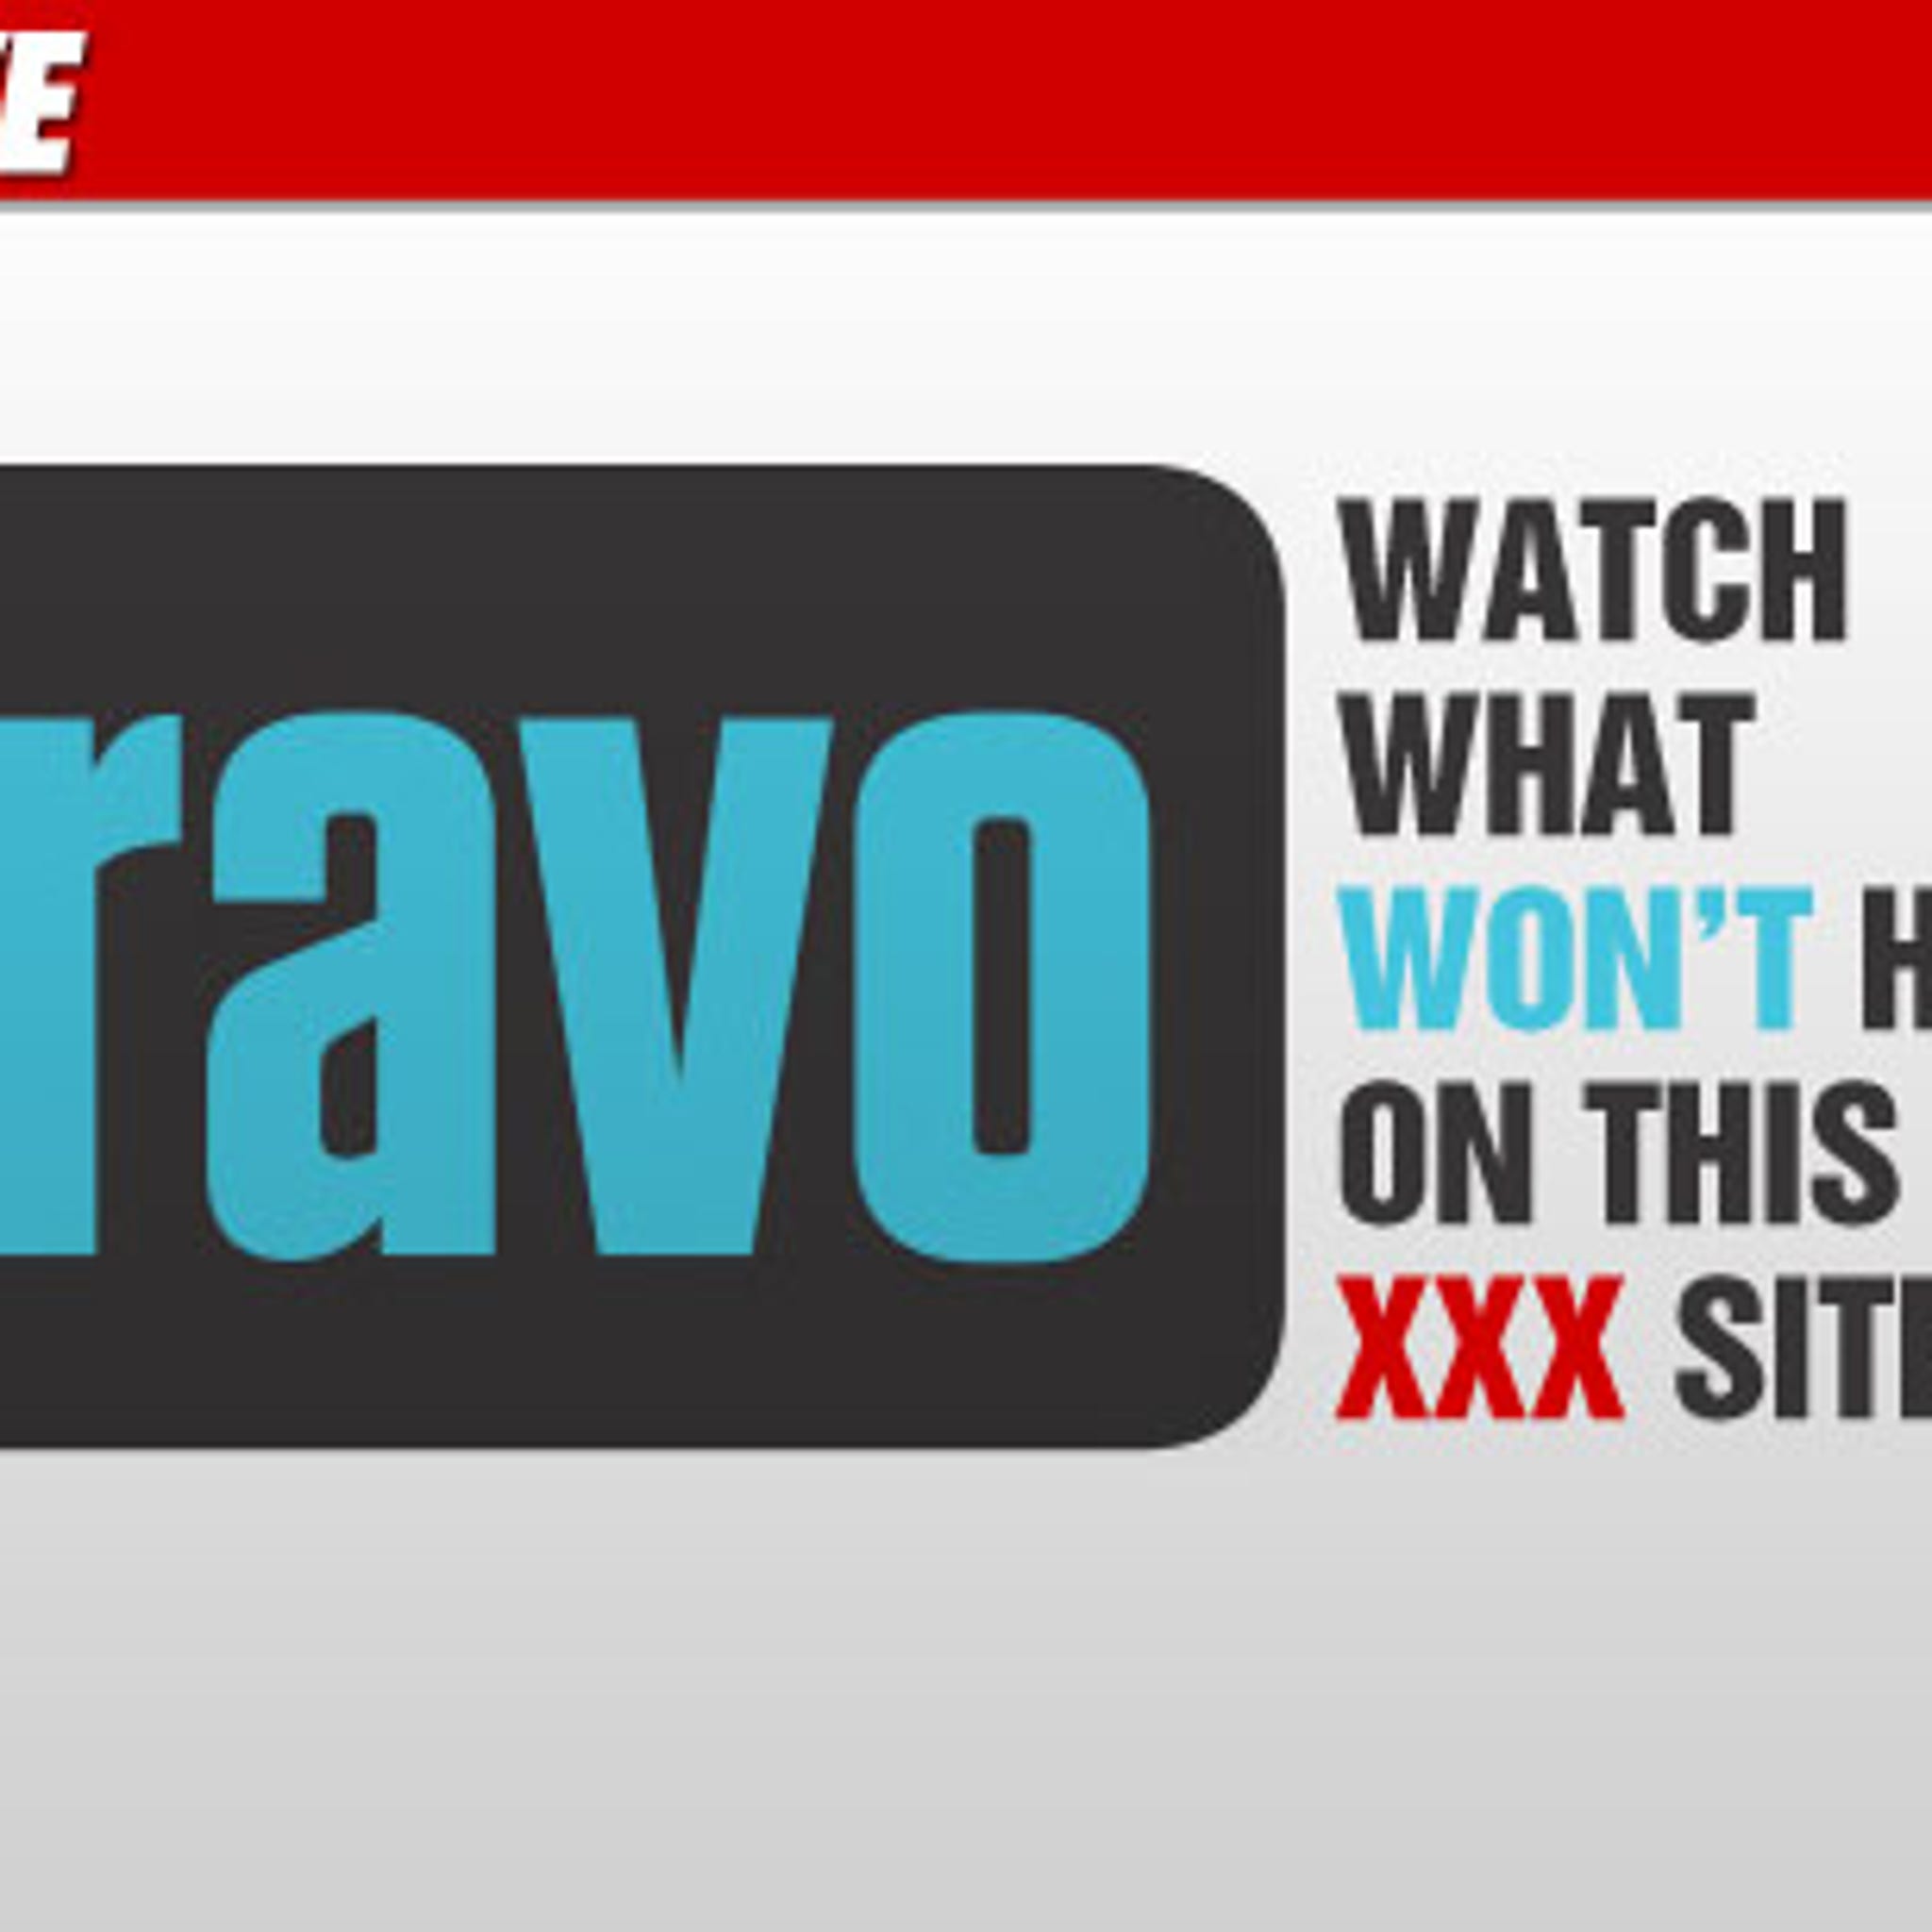 Xxx Sex Rep - Bravo to Porn Site -- Stop Pimping 'Real Housewives'!!!